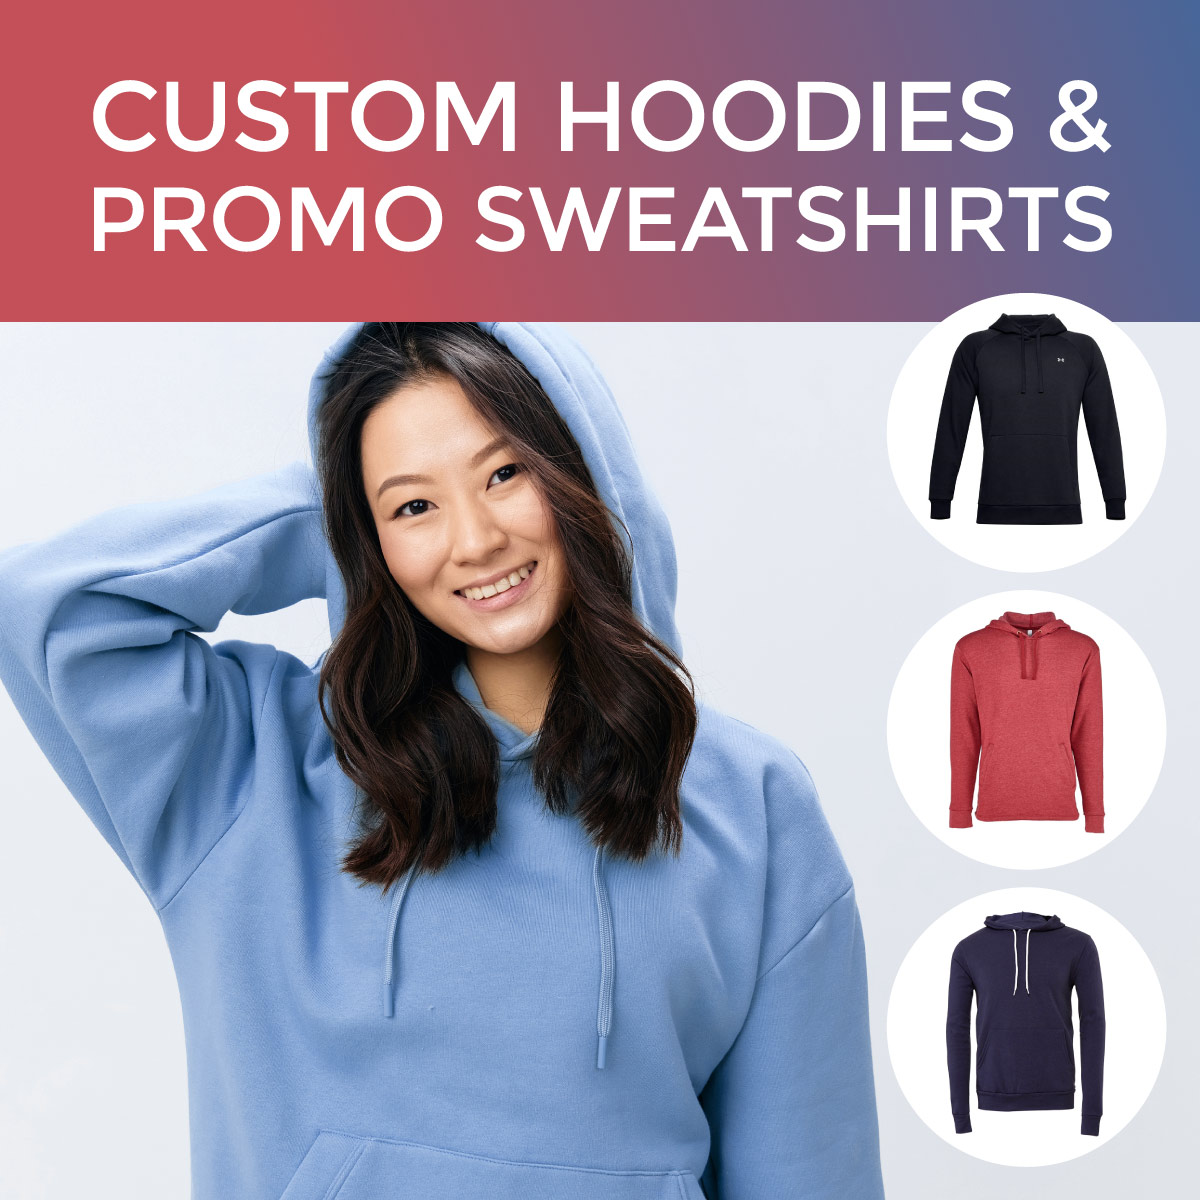 What are the best custom hoodies for marketing your business?